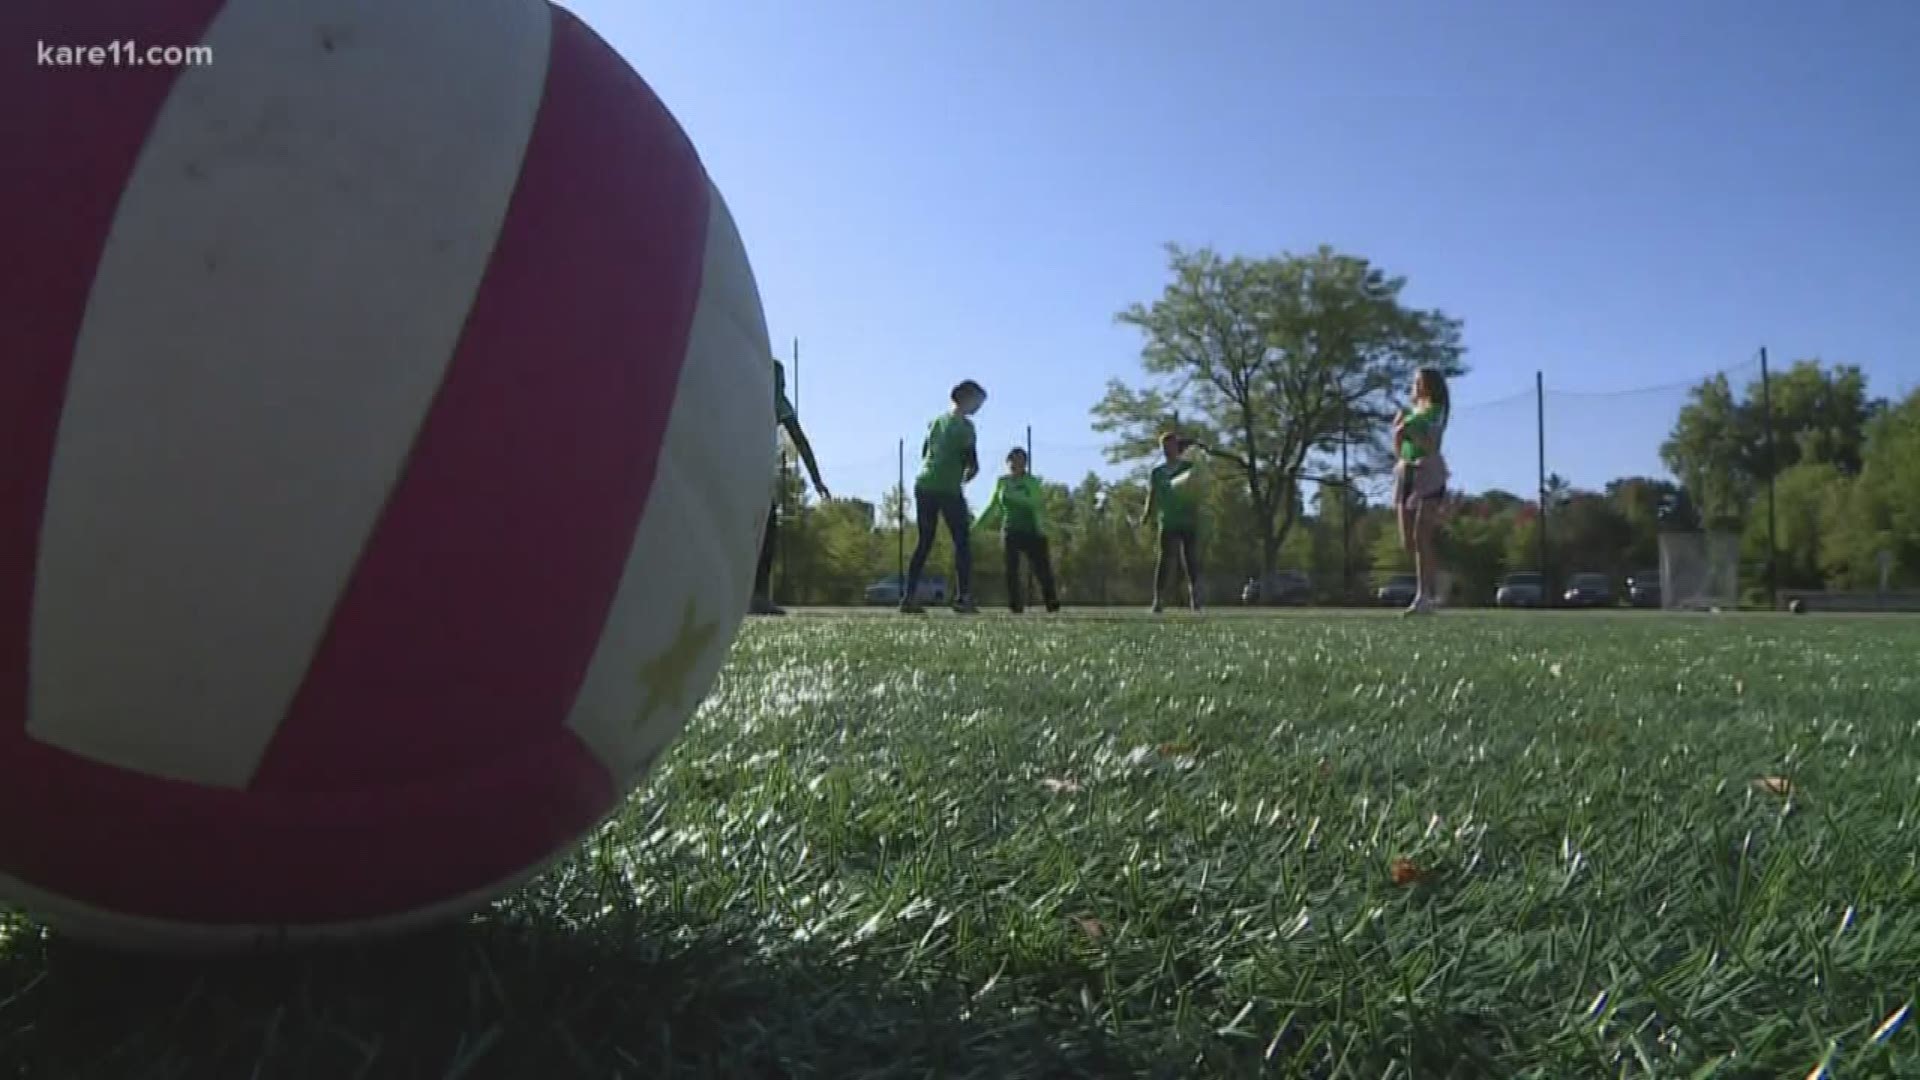 A $5,000 grant from the Edina Community Foundation is helping bring girls sports education to the community.